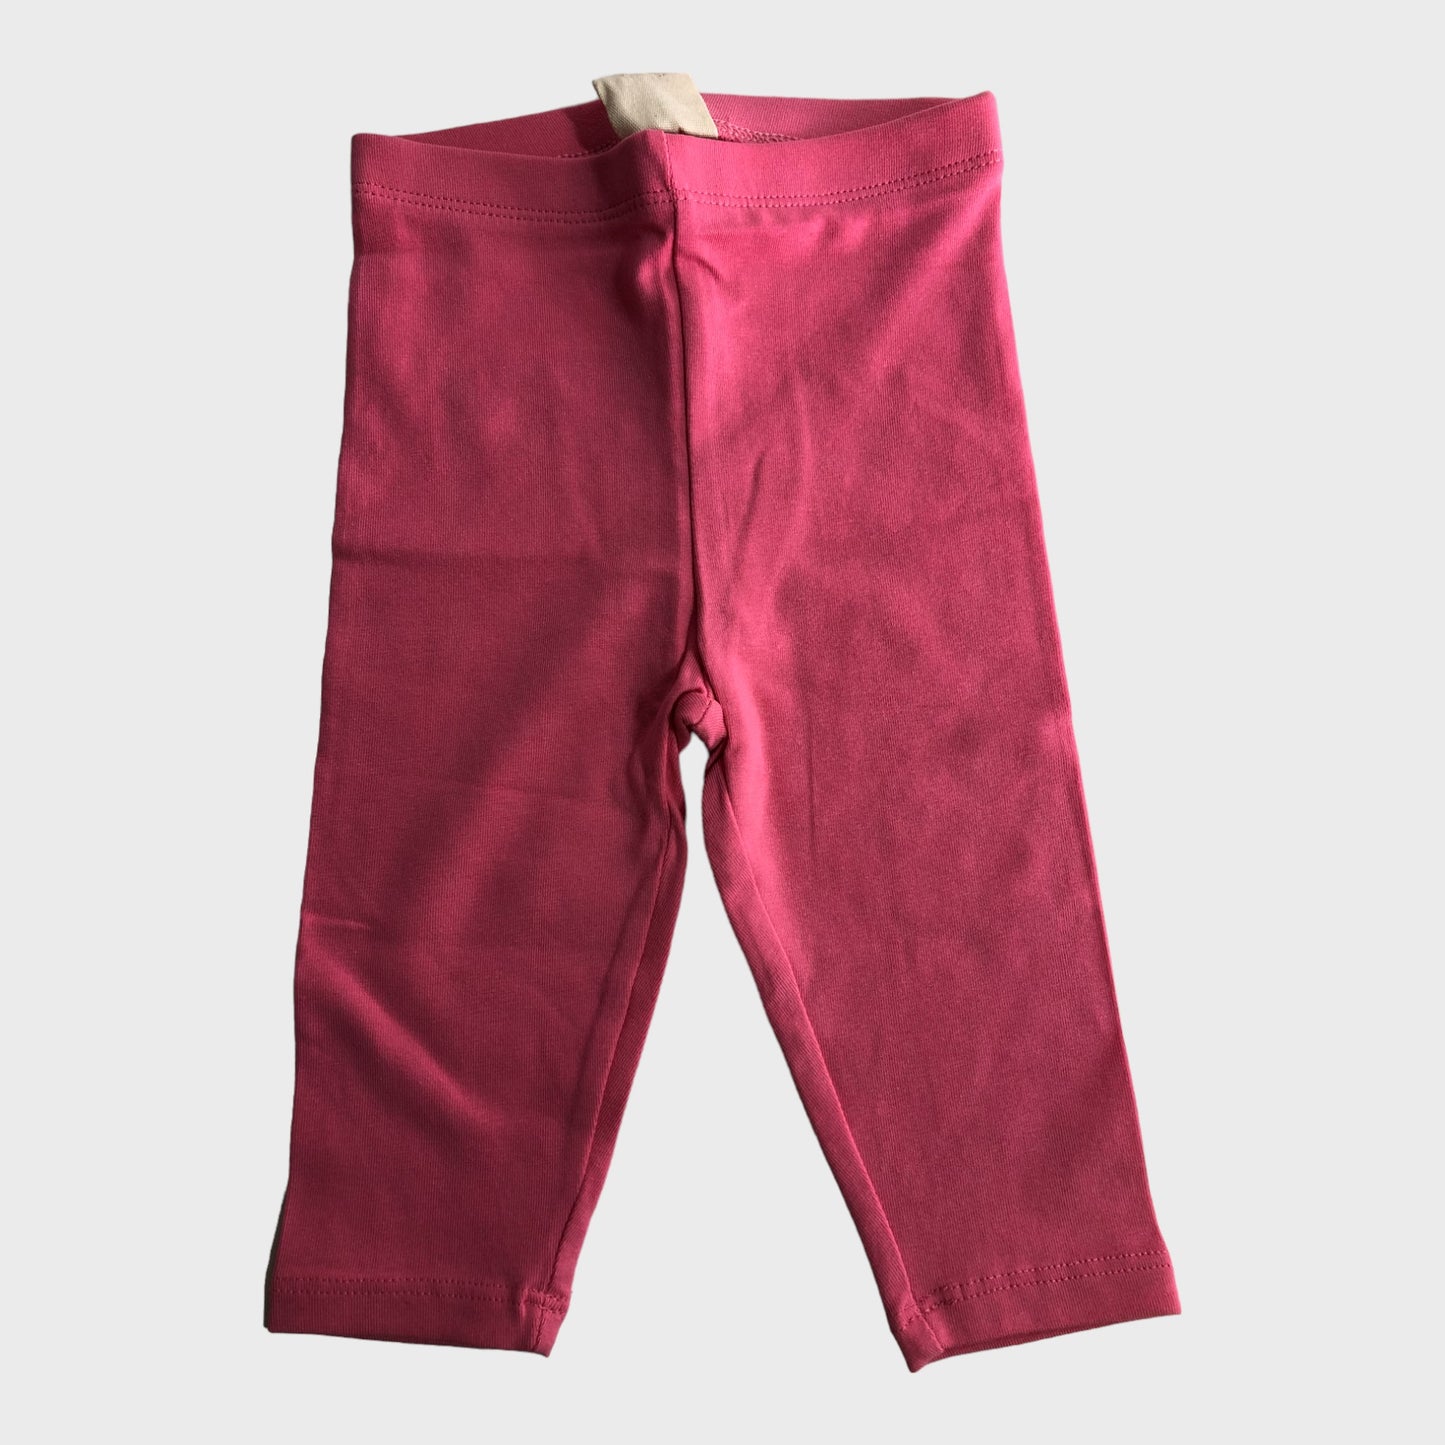 Twin Pack pink and grey leggings